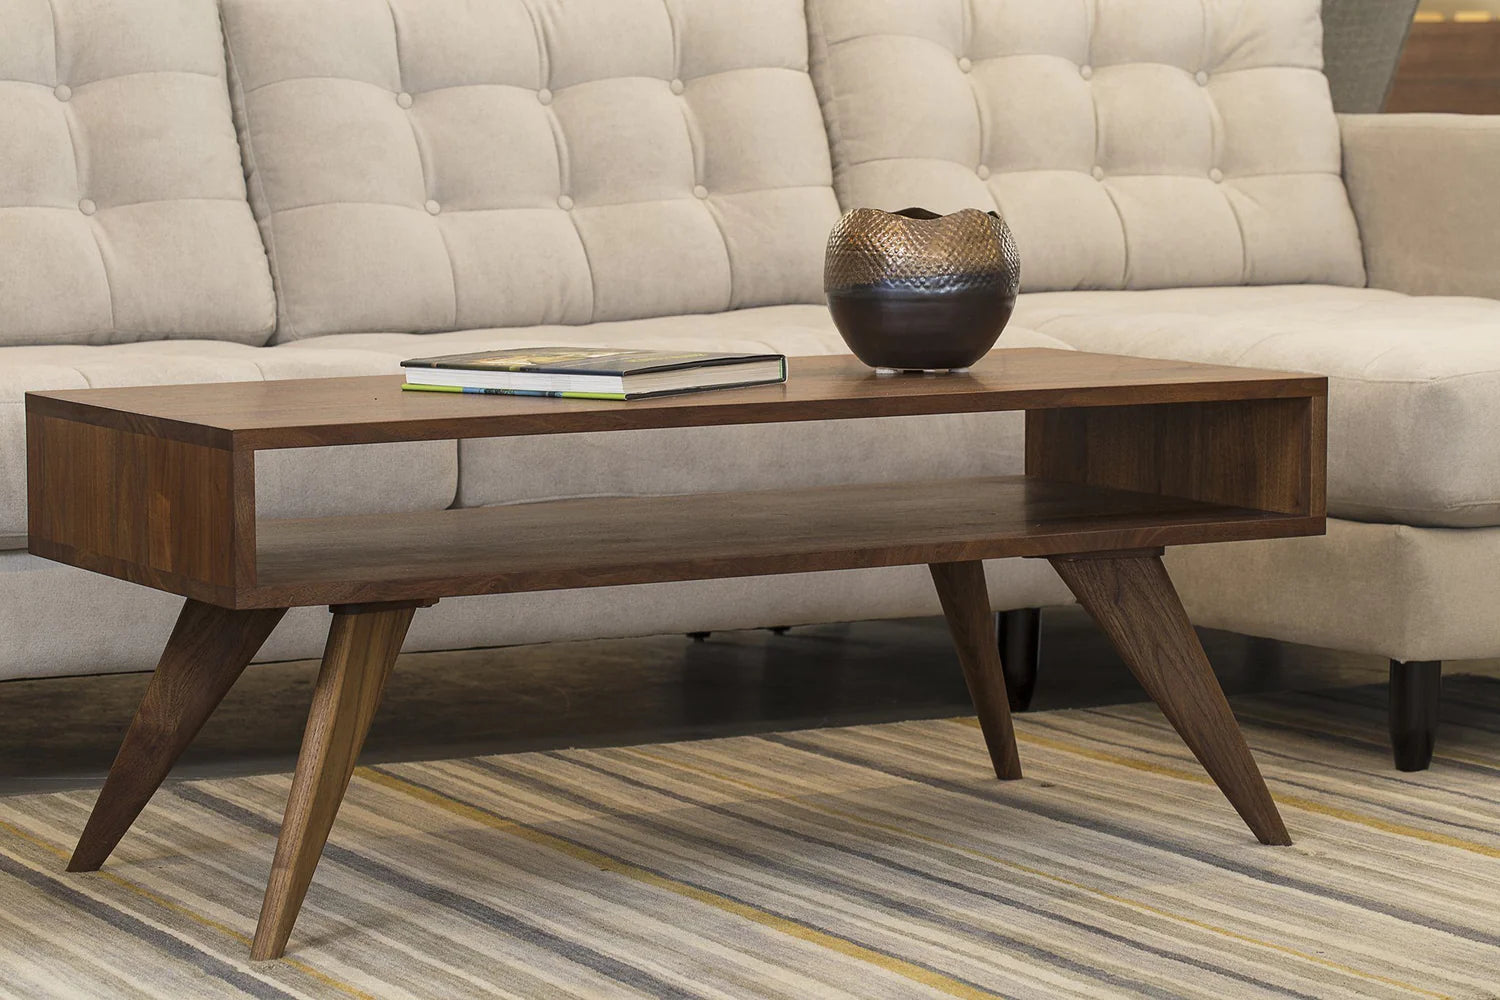 Shop Local: Coffee Table Made in the USA